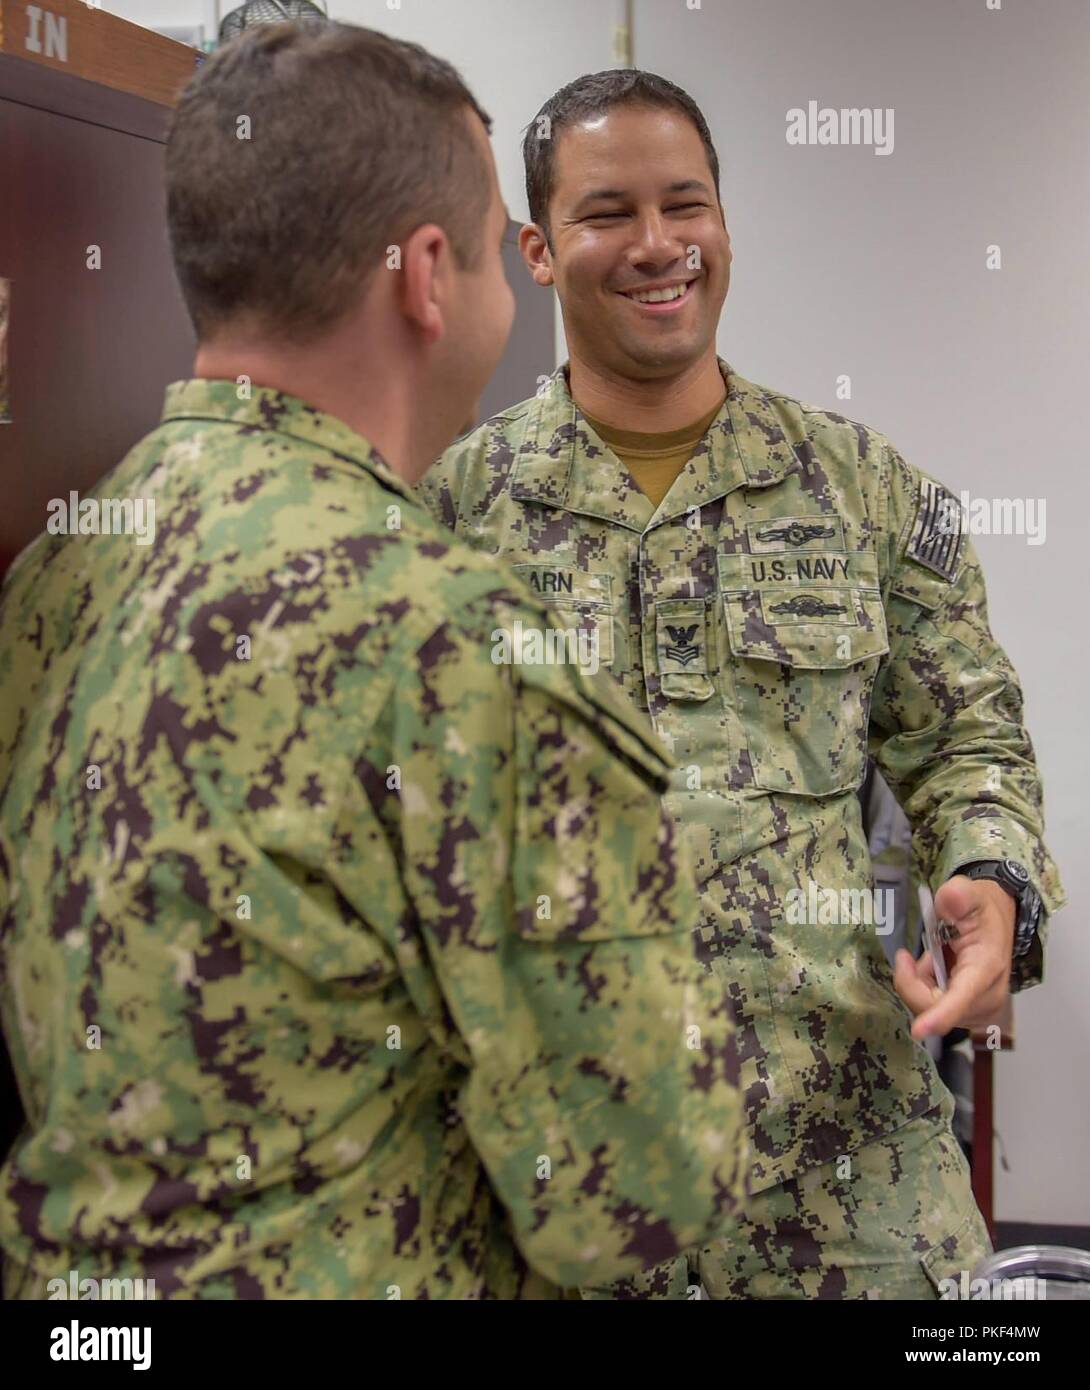 Fla. (Aug. 7, 2018) Cryptologic Technician (Technical) 1st Class Mathew Shearn, a training manager at the Center for Information Warfare Training (CIWT), receives news of his selection to the rank of chief petty officer from CIWT’s commanding officer, Capt. Nick Andrews. Fifty-five staff members across the CIWT domain were selected for promotion. Stock Photo